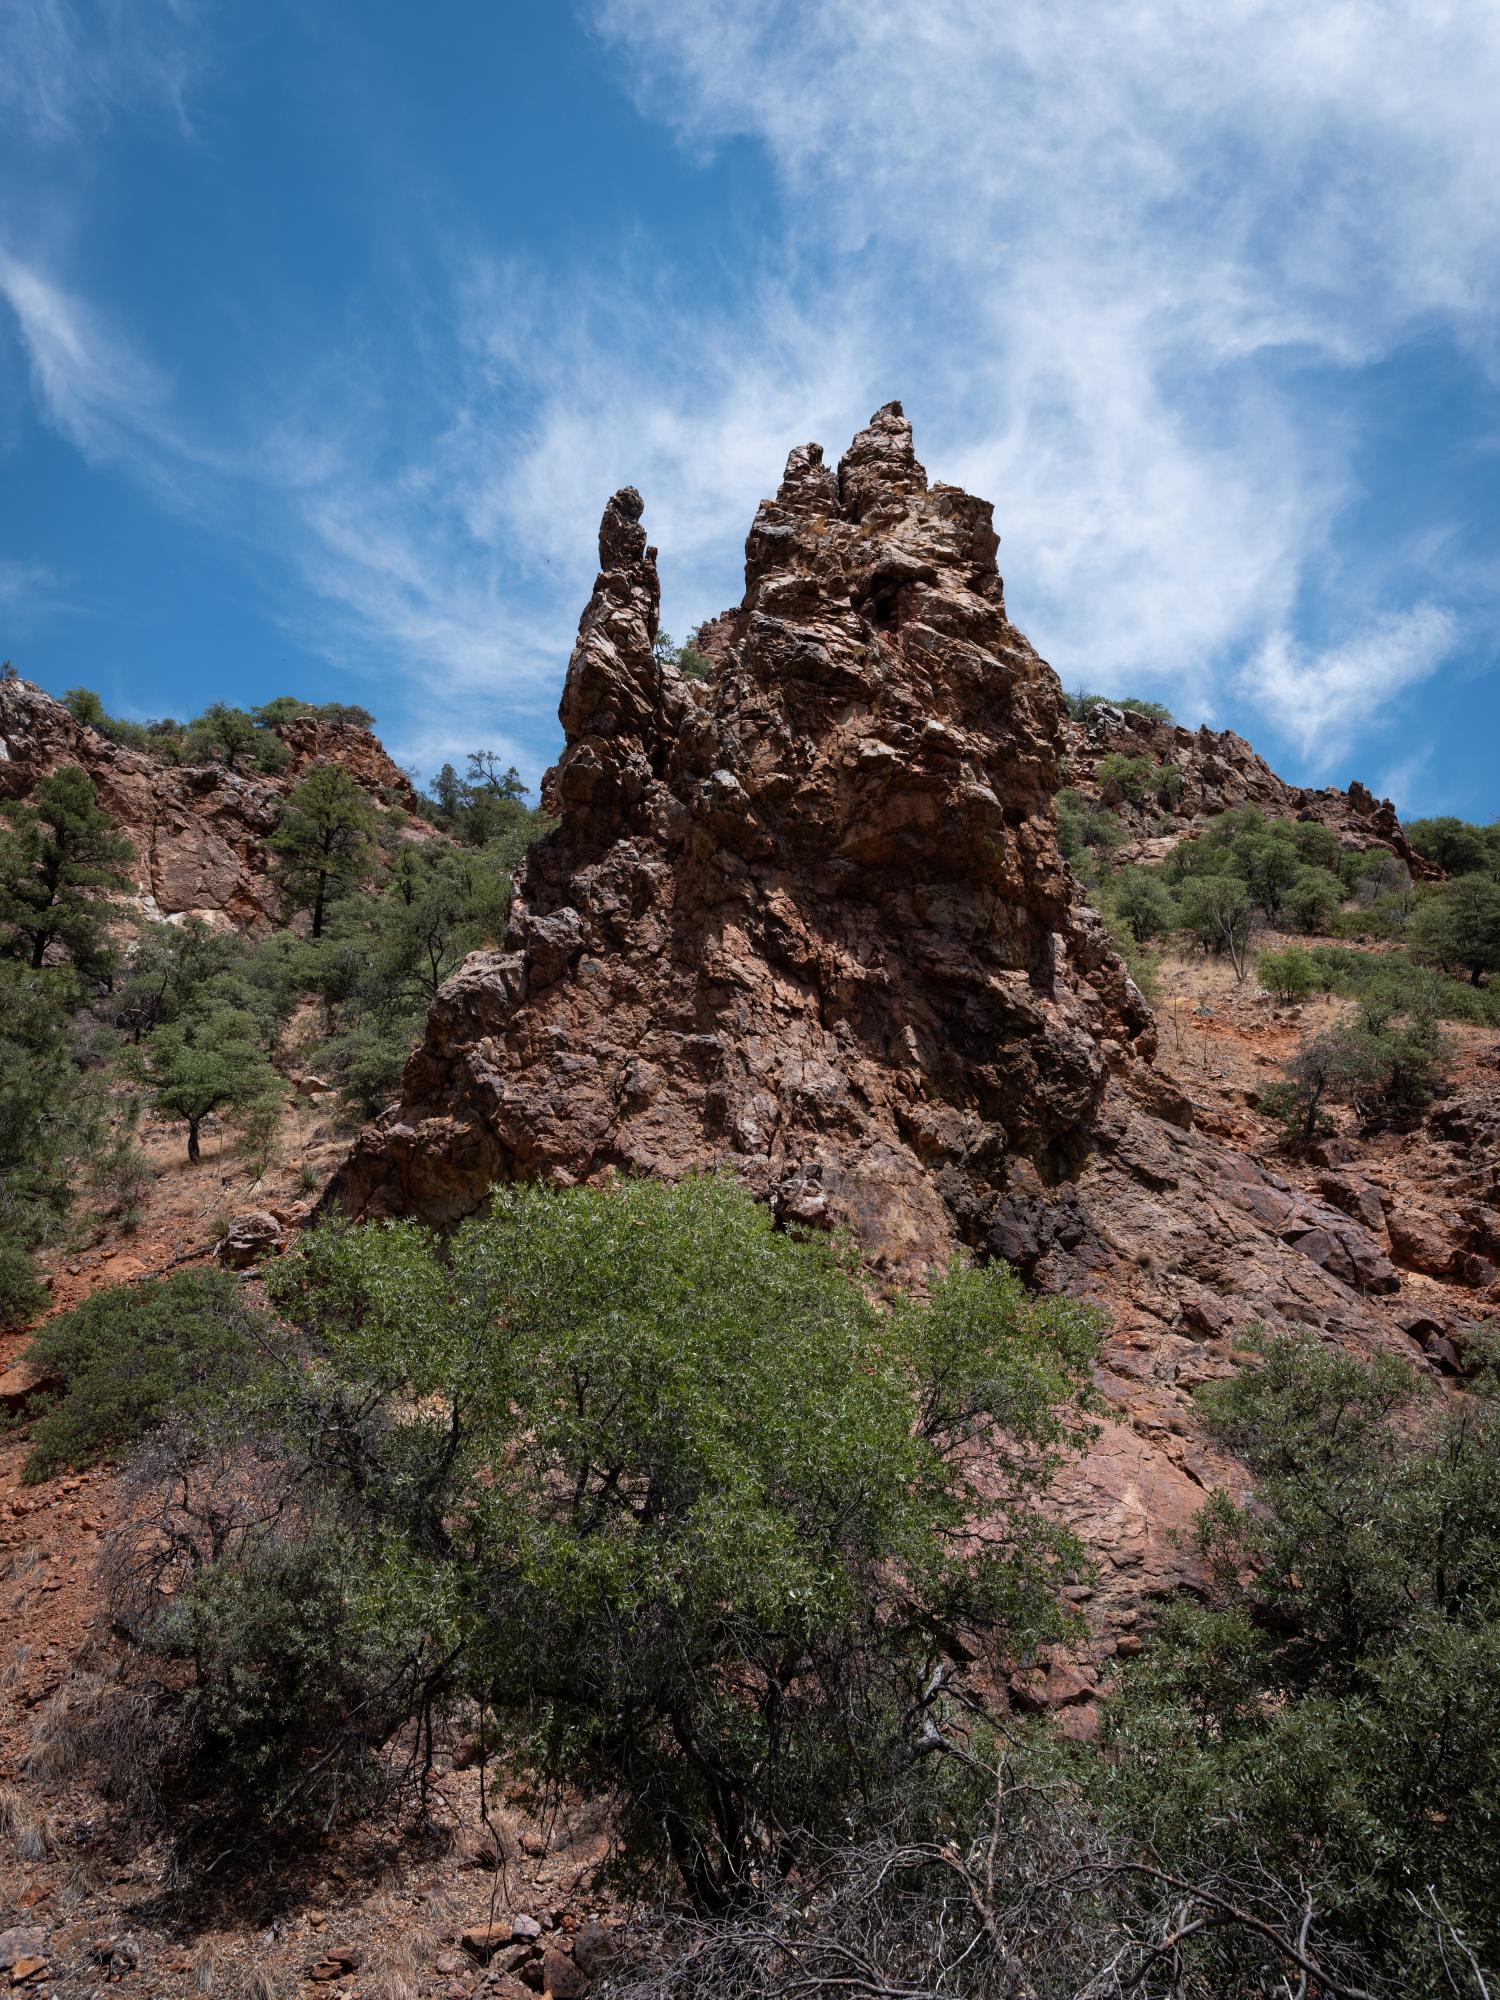 Saving the Patagonias - The Intercept - Rock formations in Humboldt Canyon, in Arizona’s...